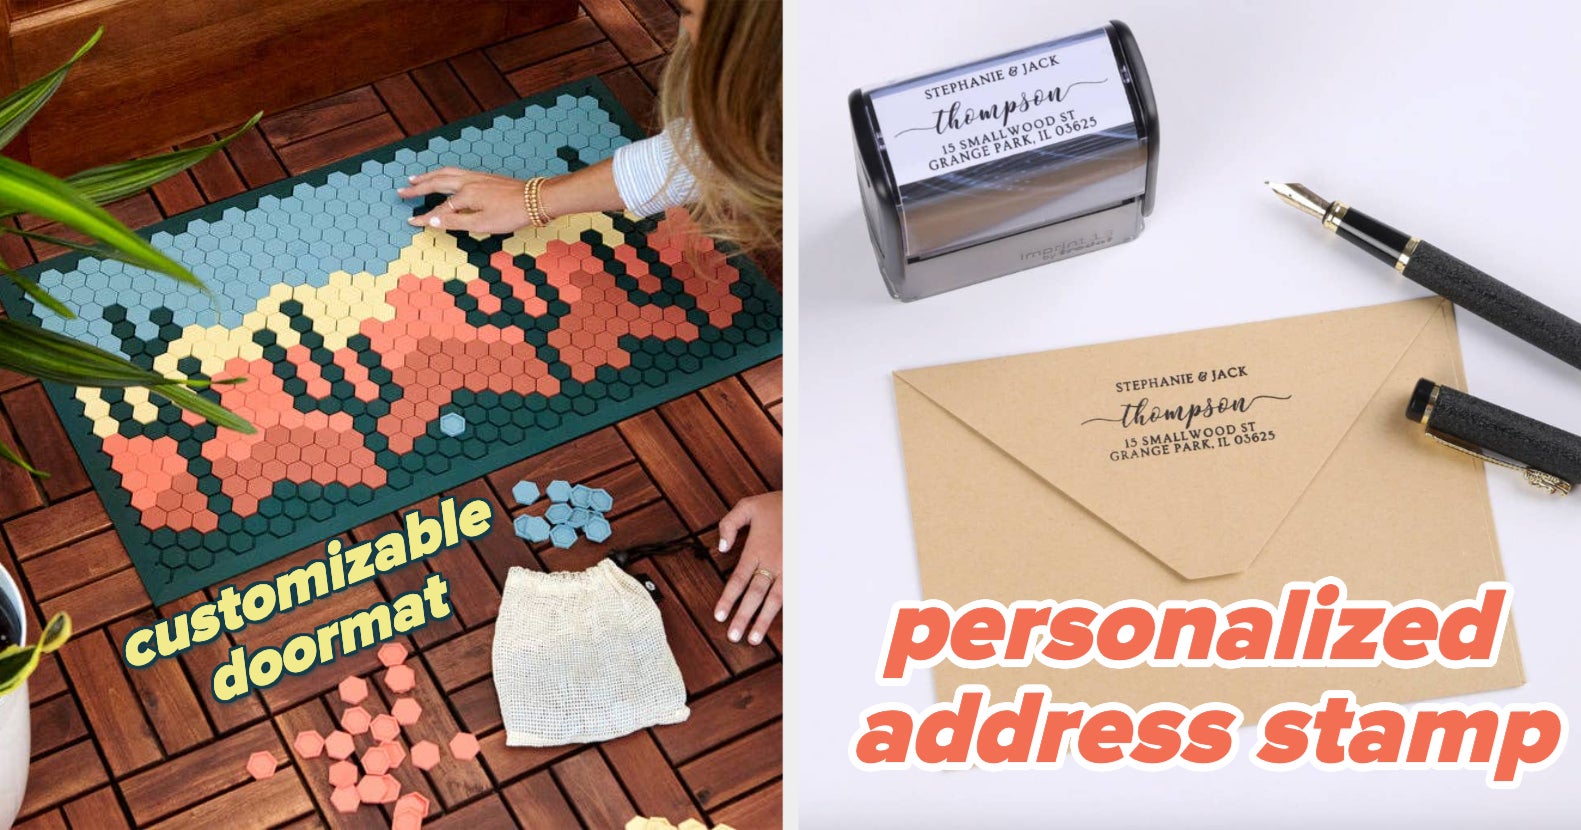 13 Housewarming Gifts for Newlyweds